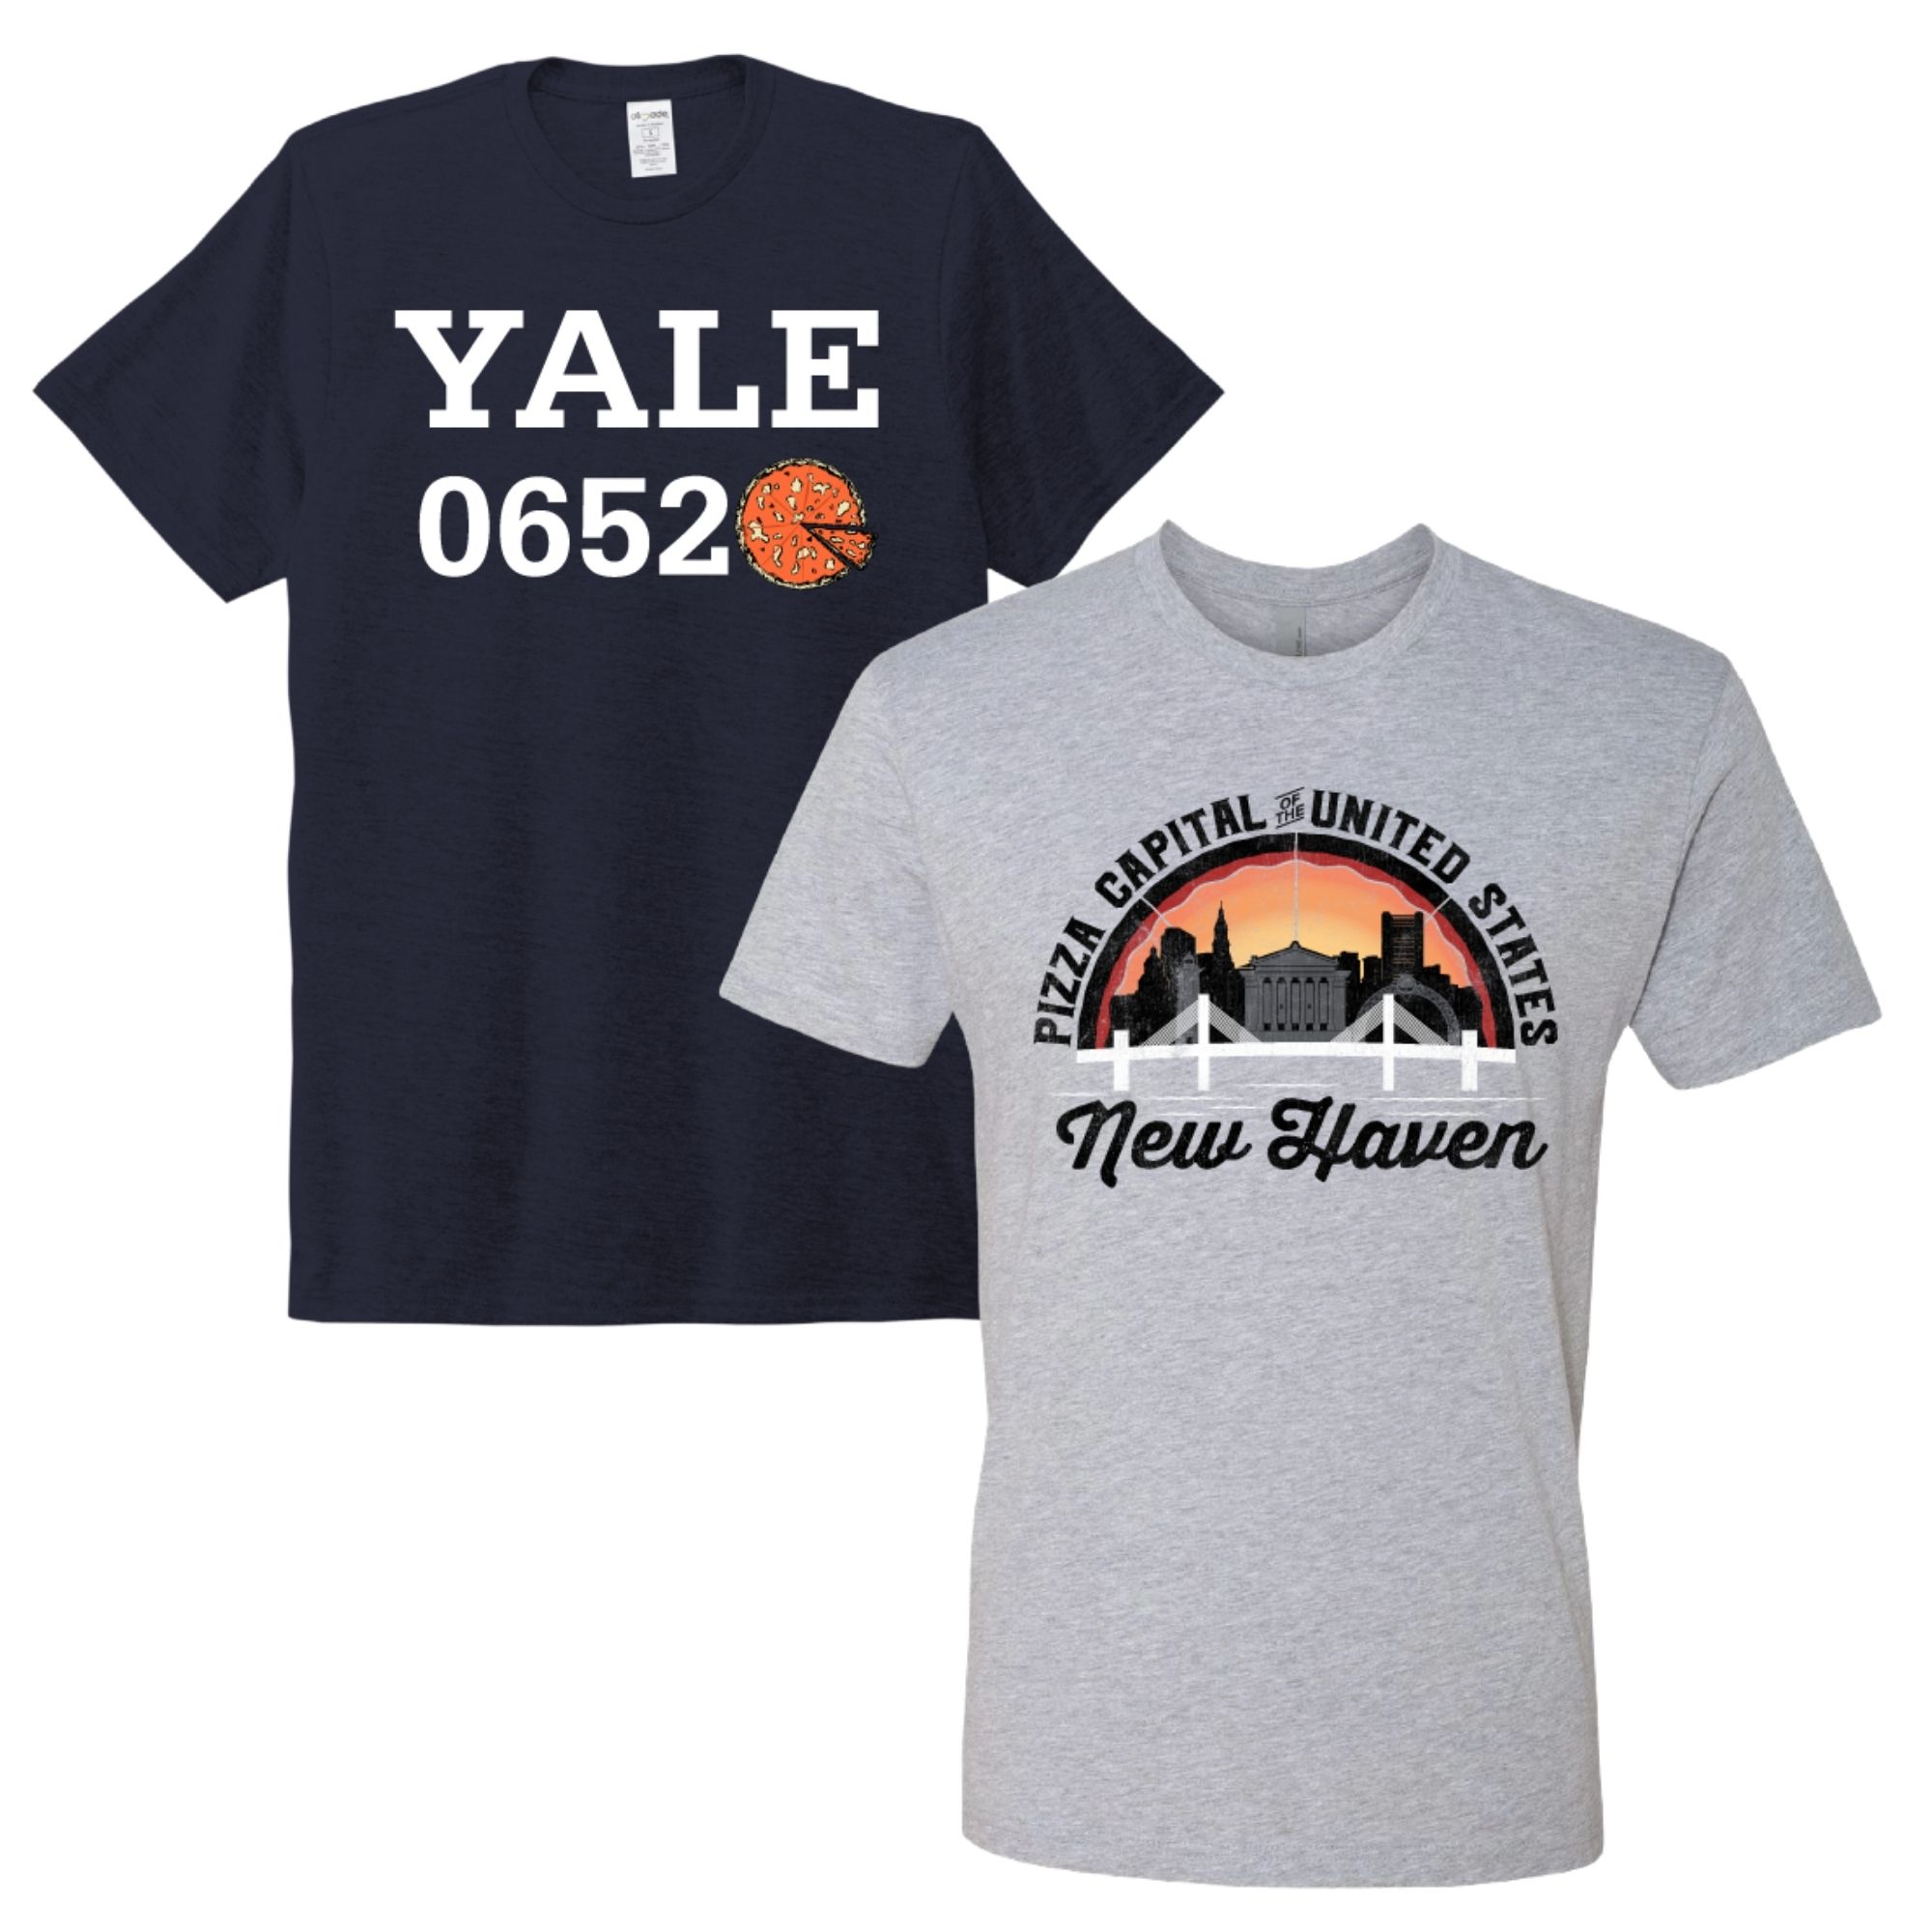 New Haven Pizza shirts from Yale Bulldog Blue